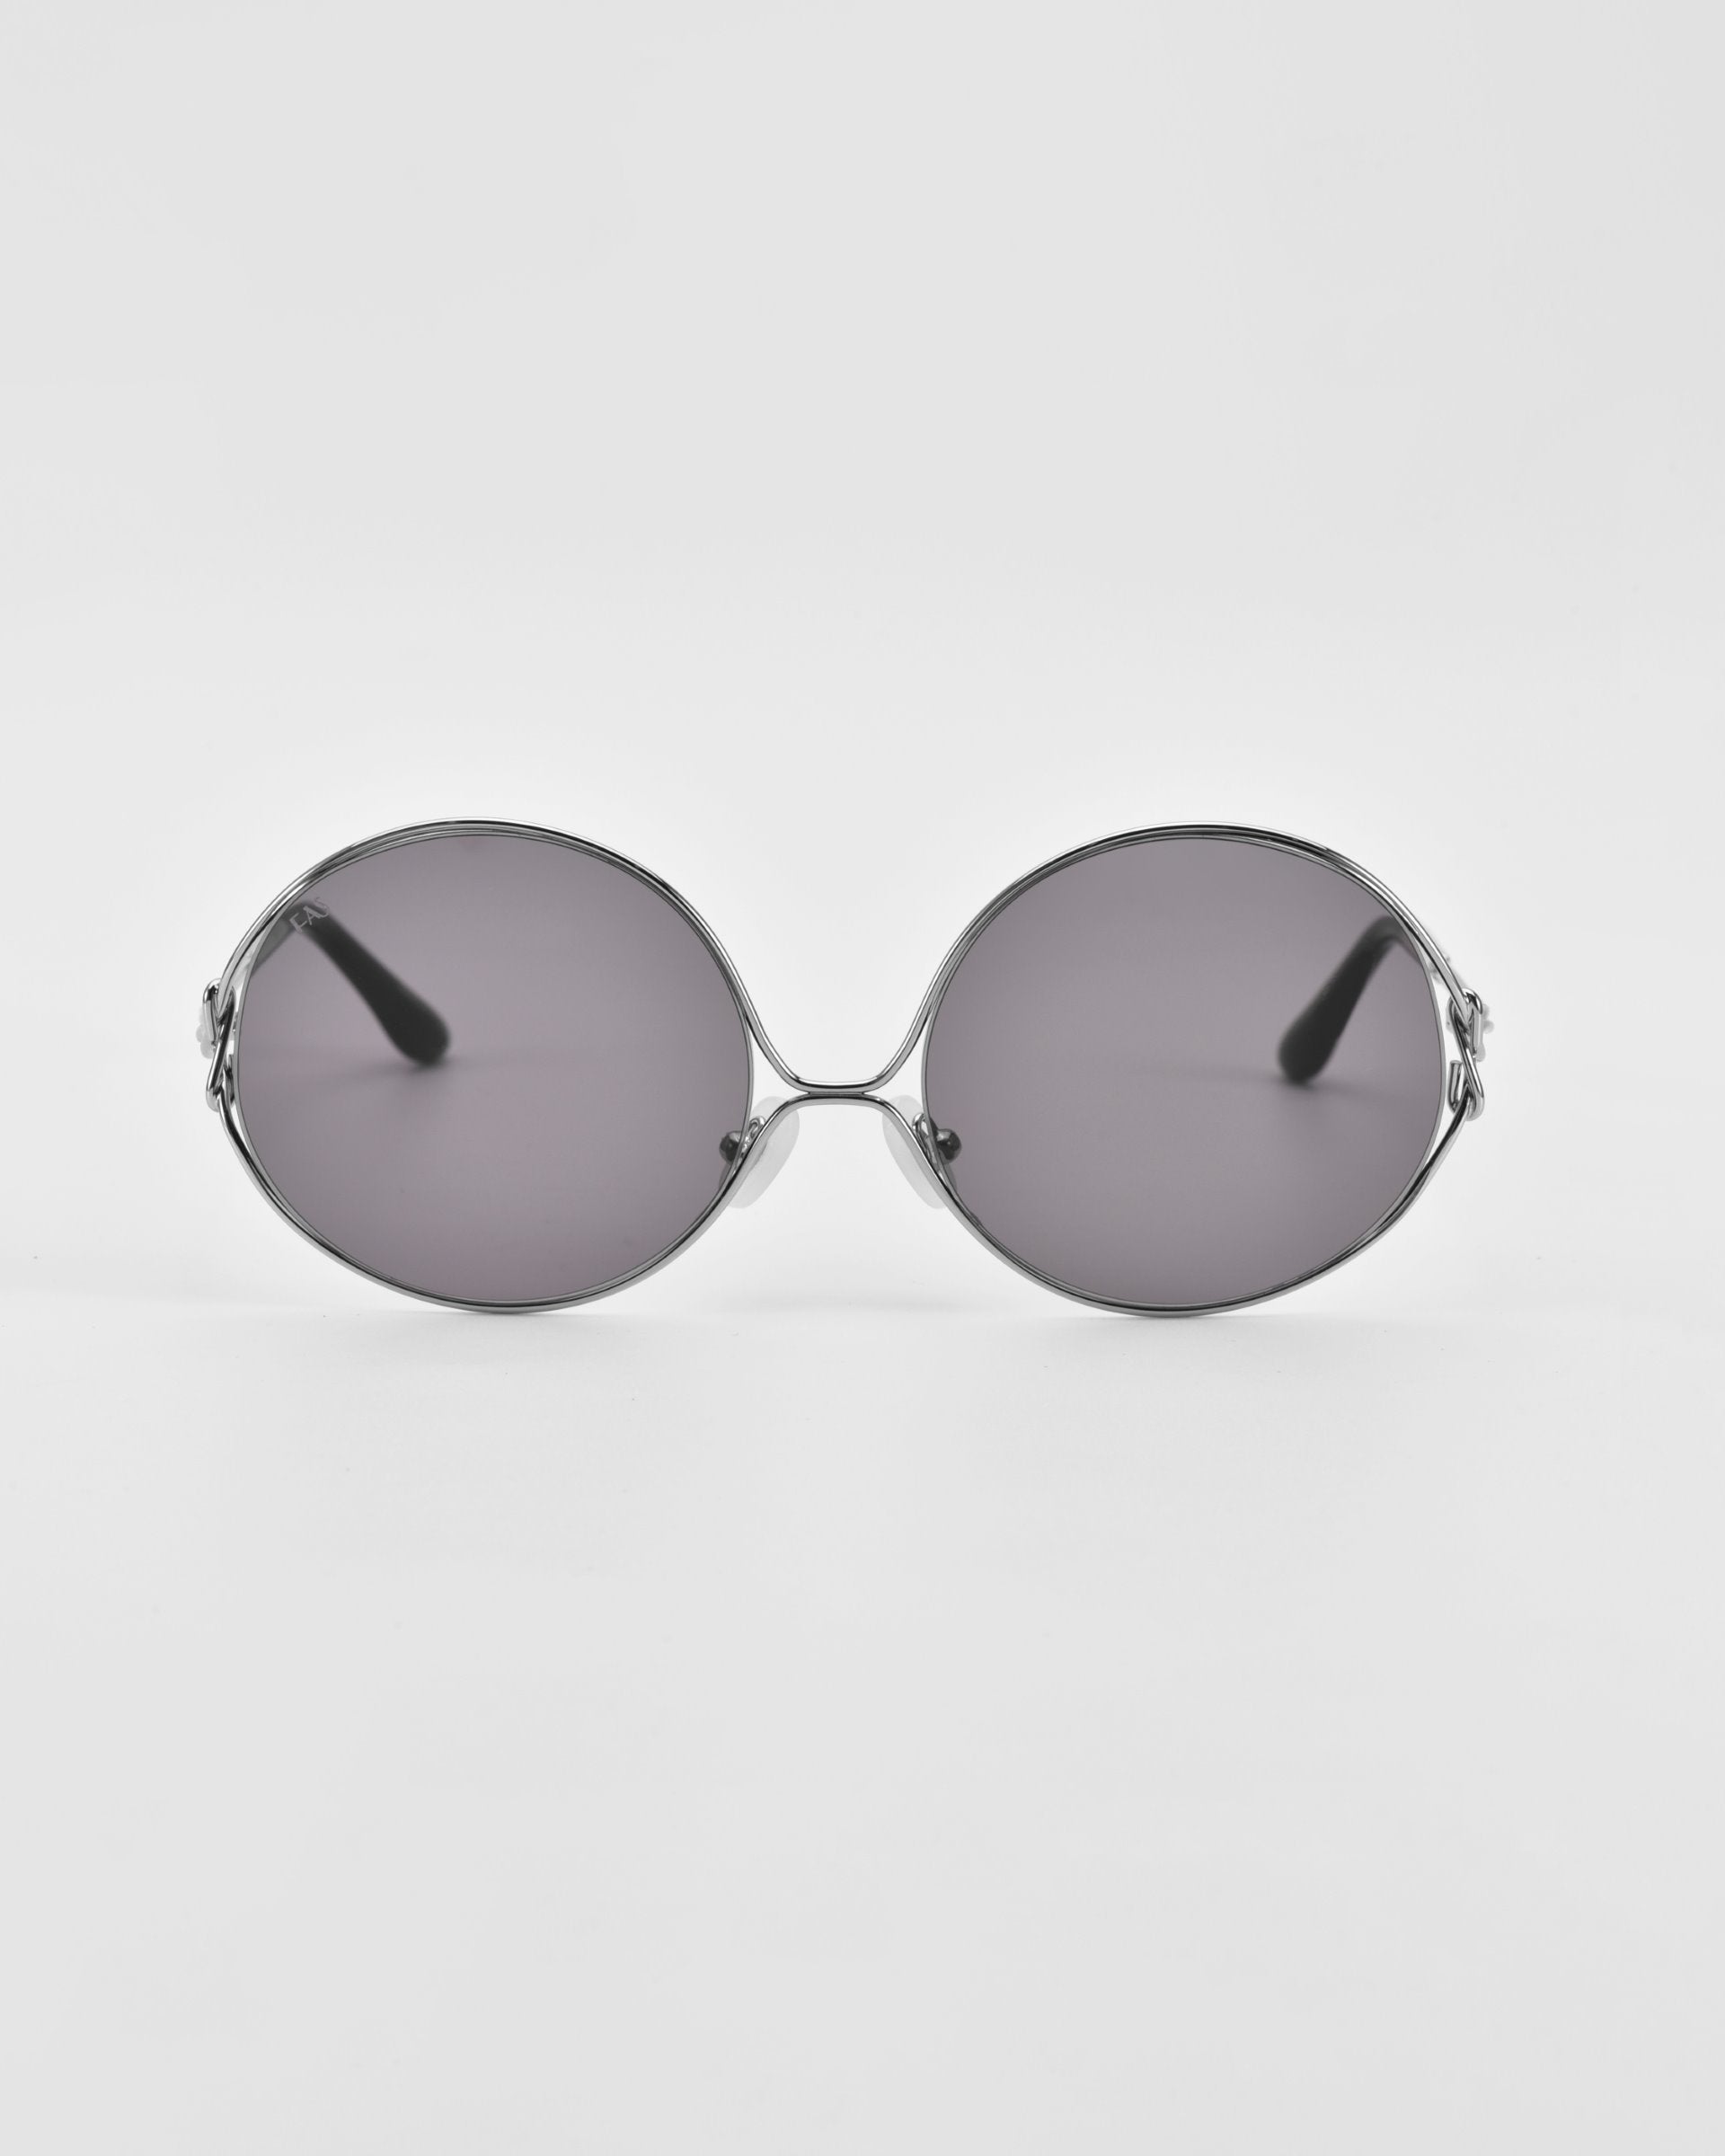 A pair of Aura sunglasses by For Art&#39;s Sake® with gradient tinted lenses and thin, silver-colored metal frames. The oversized round frames extend backward, offering a sleek and minimalist design. The sunglasses are set against a plain white background.